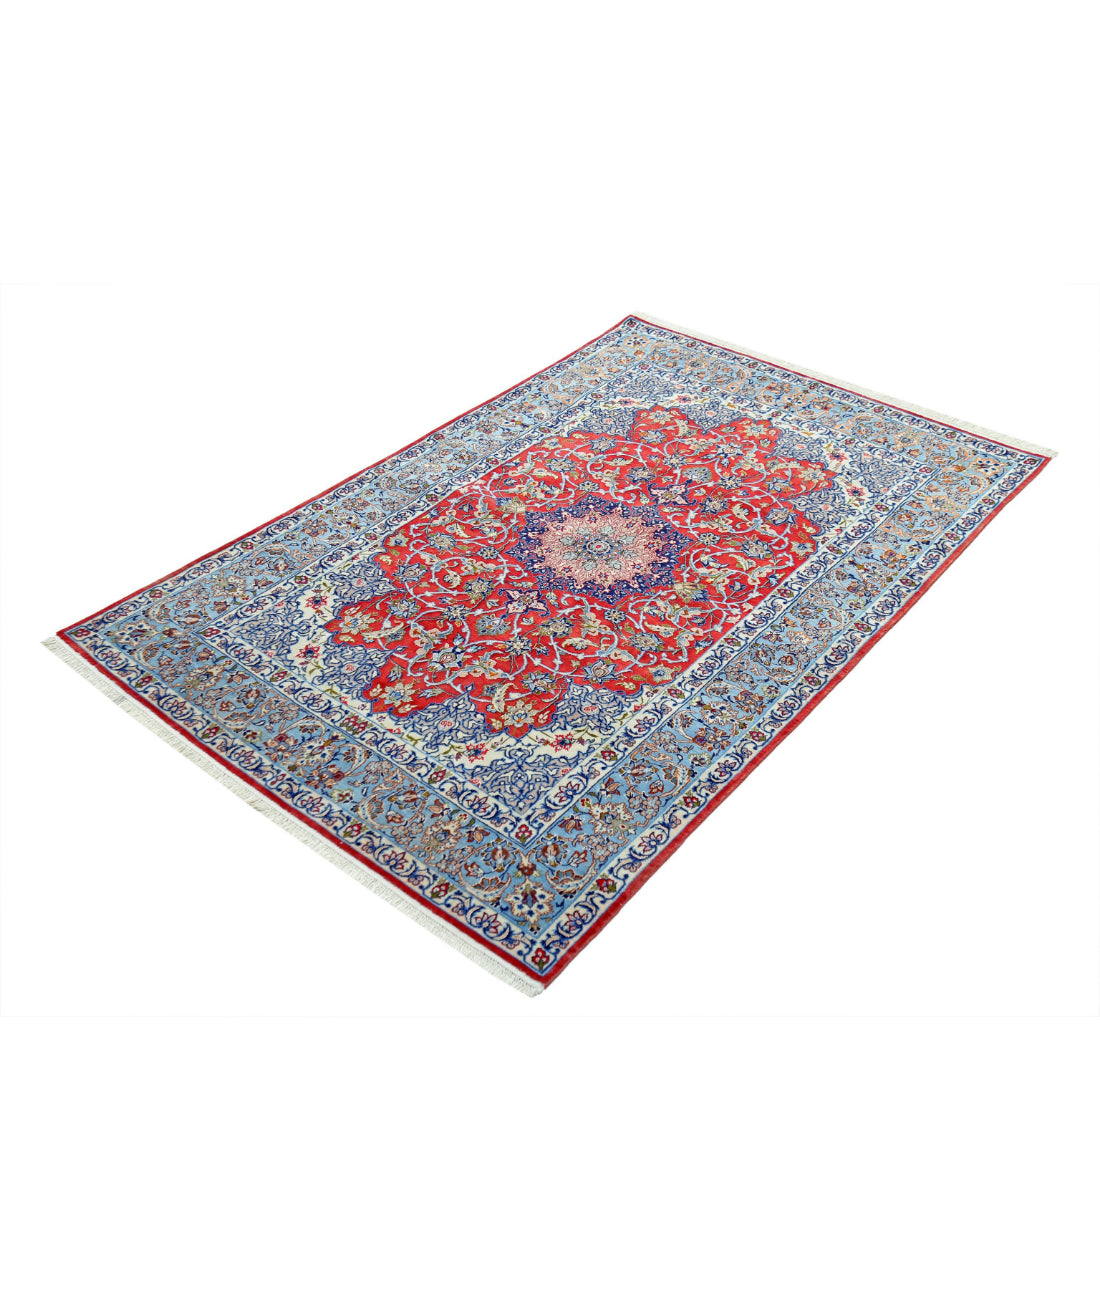 Hand Knotted Masterpiece Persian Isfahan Wool & Silk Rug - 3'6'' x 5'5'' 3'6'' x 5'5'' (105 X 163) / Red / Blue